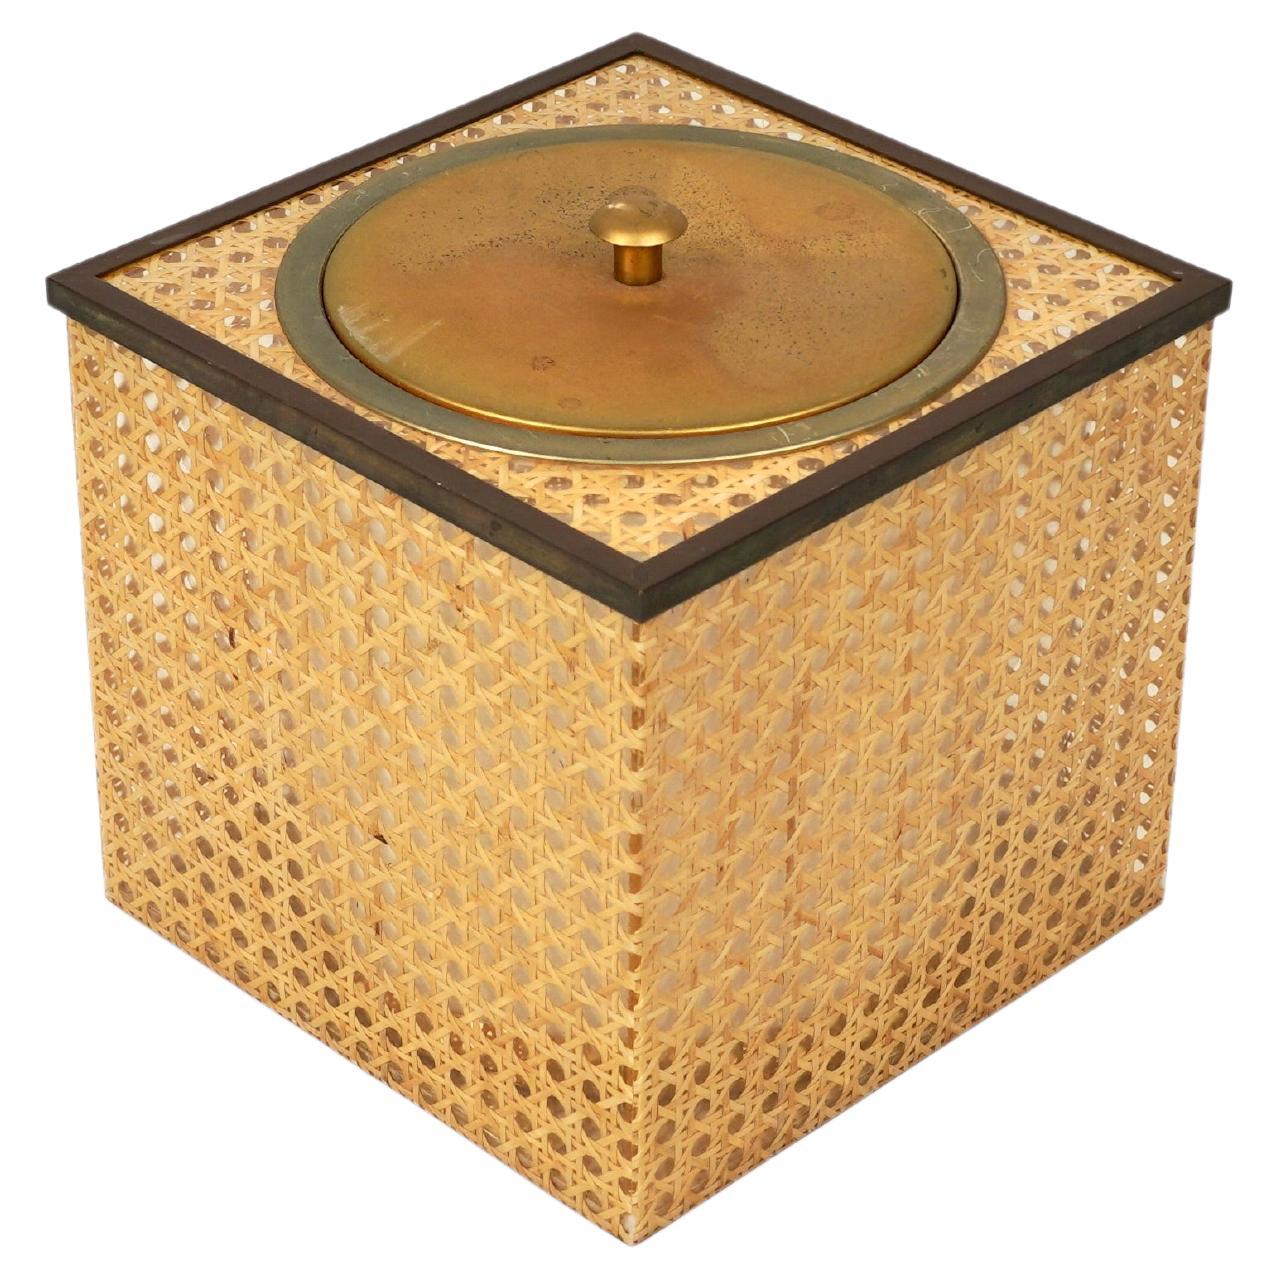 Cube Ice Bucket in Lucite, Rattan and Brass Christian Dior Style, Italy, 1970s For Sale